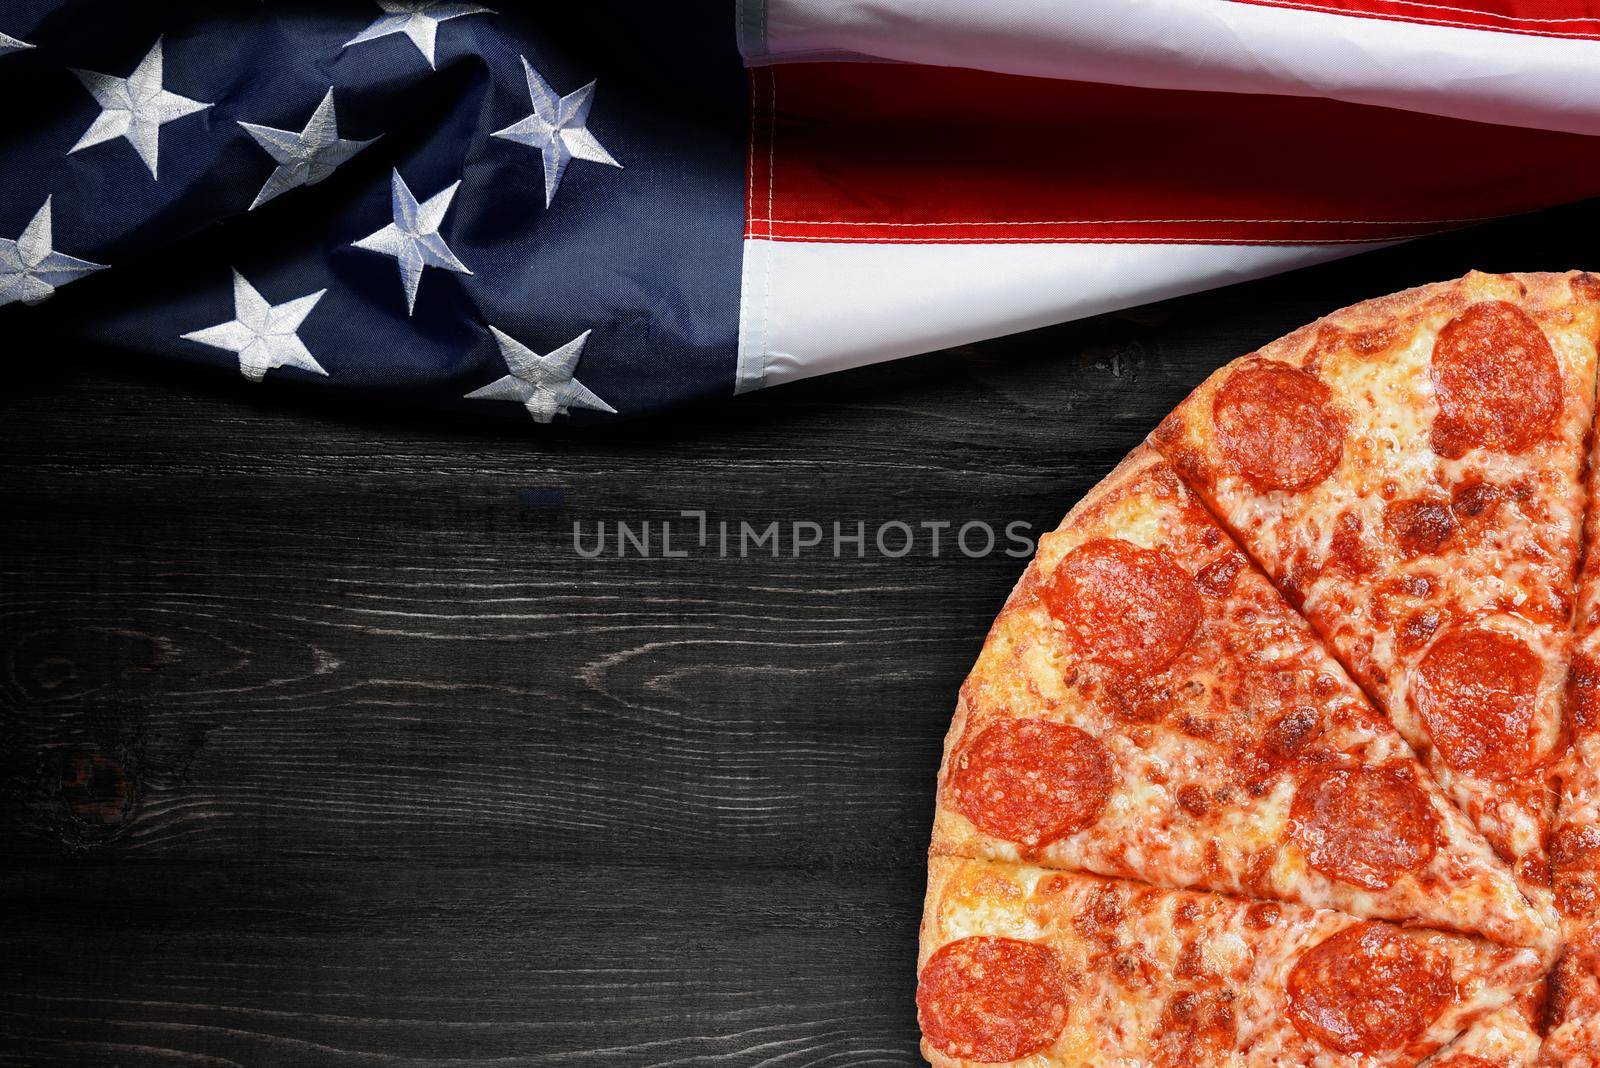 American flag and pizza with place for text